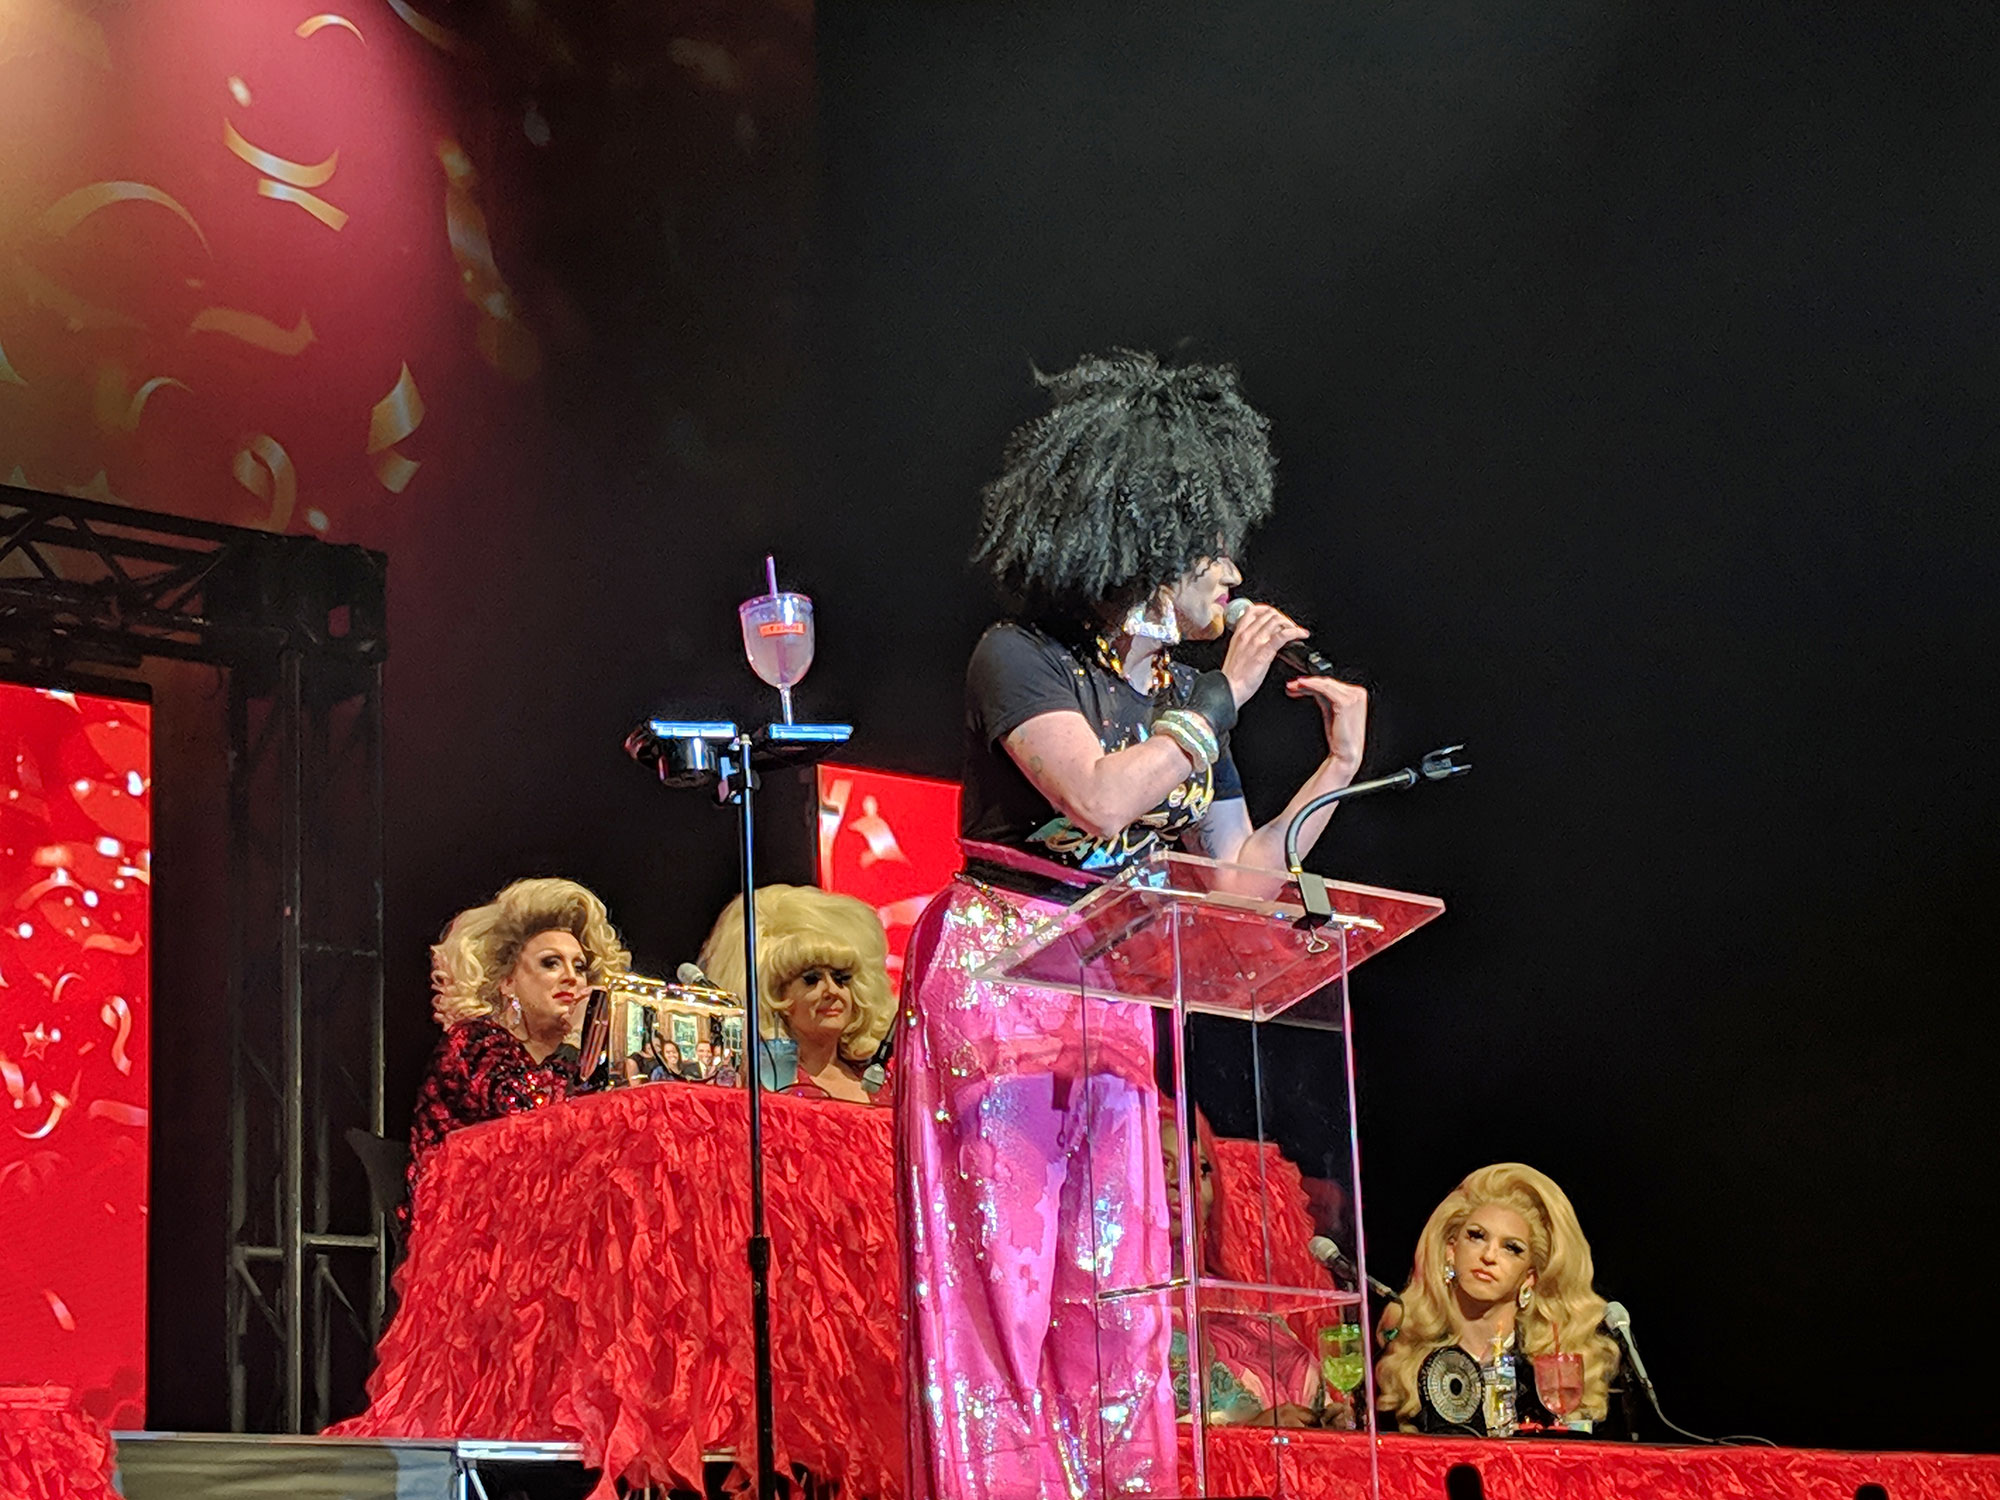 Thorgy Thor performing at the Warner Theatre in Washington D.C. with queens glaring in the background.